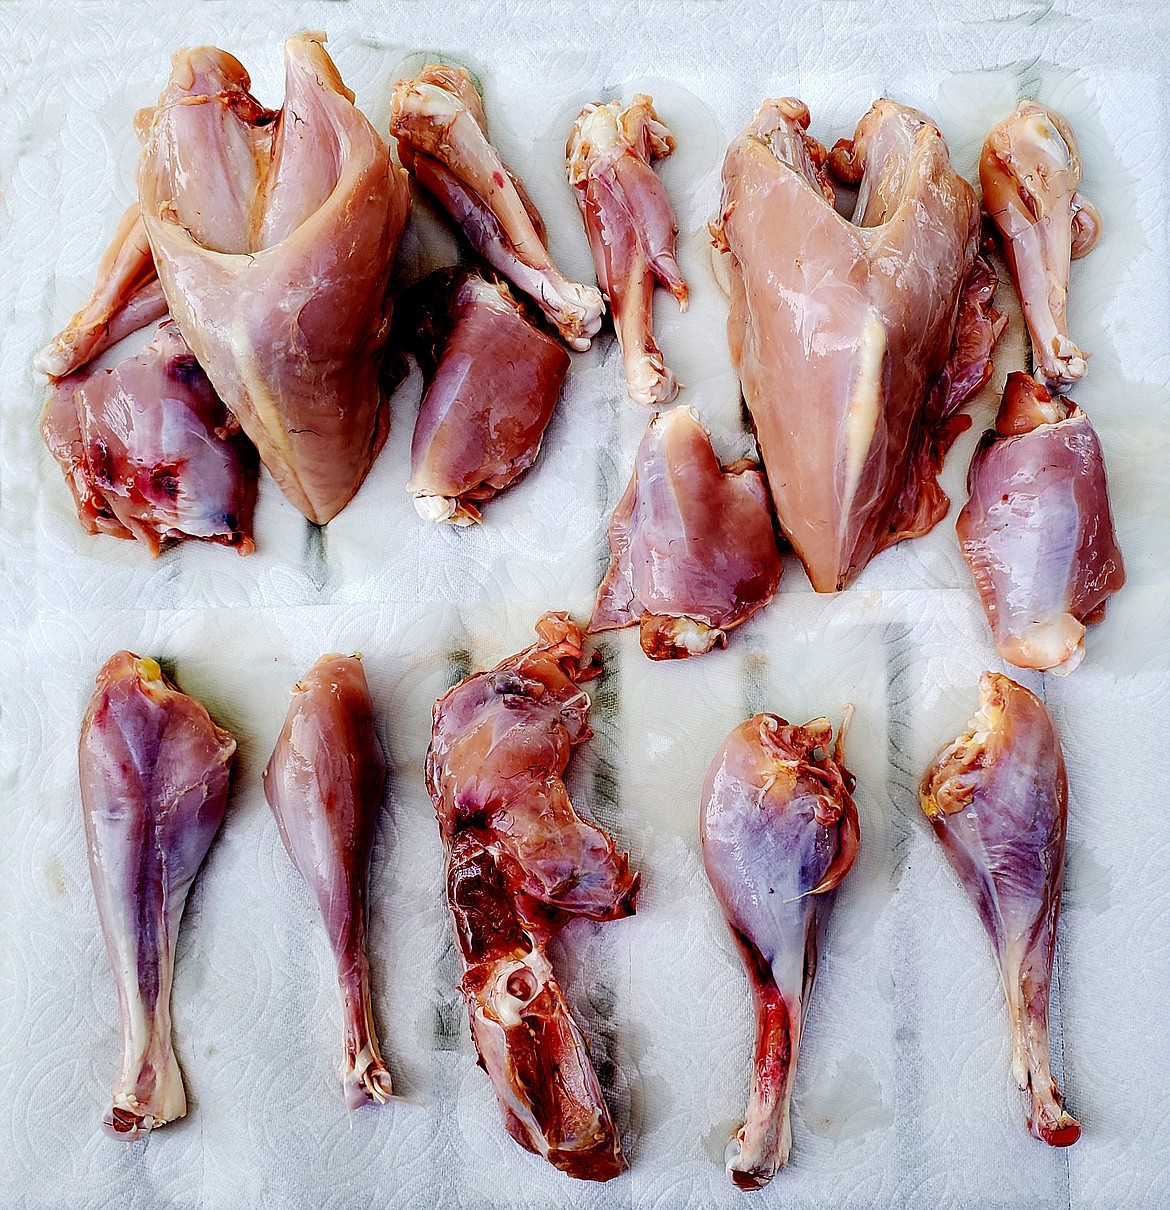 Dennis L. Clay
Uncooked turkey meat: The meat from two wild turkeys include: Top row, left to right, first section of the wing, a complete breast, another wing section. Same on the right with the second turkey. Second row: Two thighs, one on the left and one the right, outside of the breast. Bottom row: Two legs, from the first turkey, part of the back and two more legs, from the second turkey.